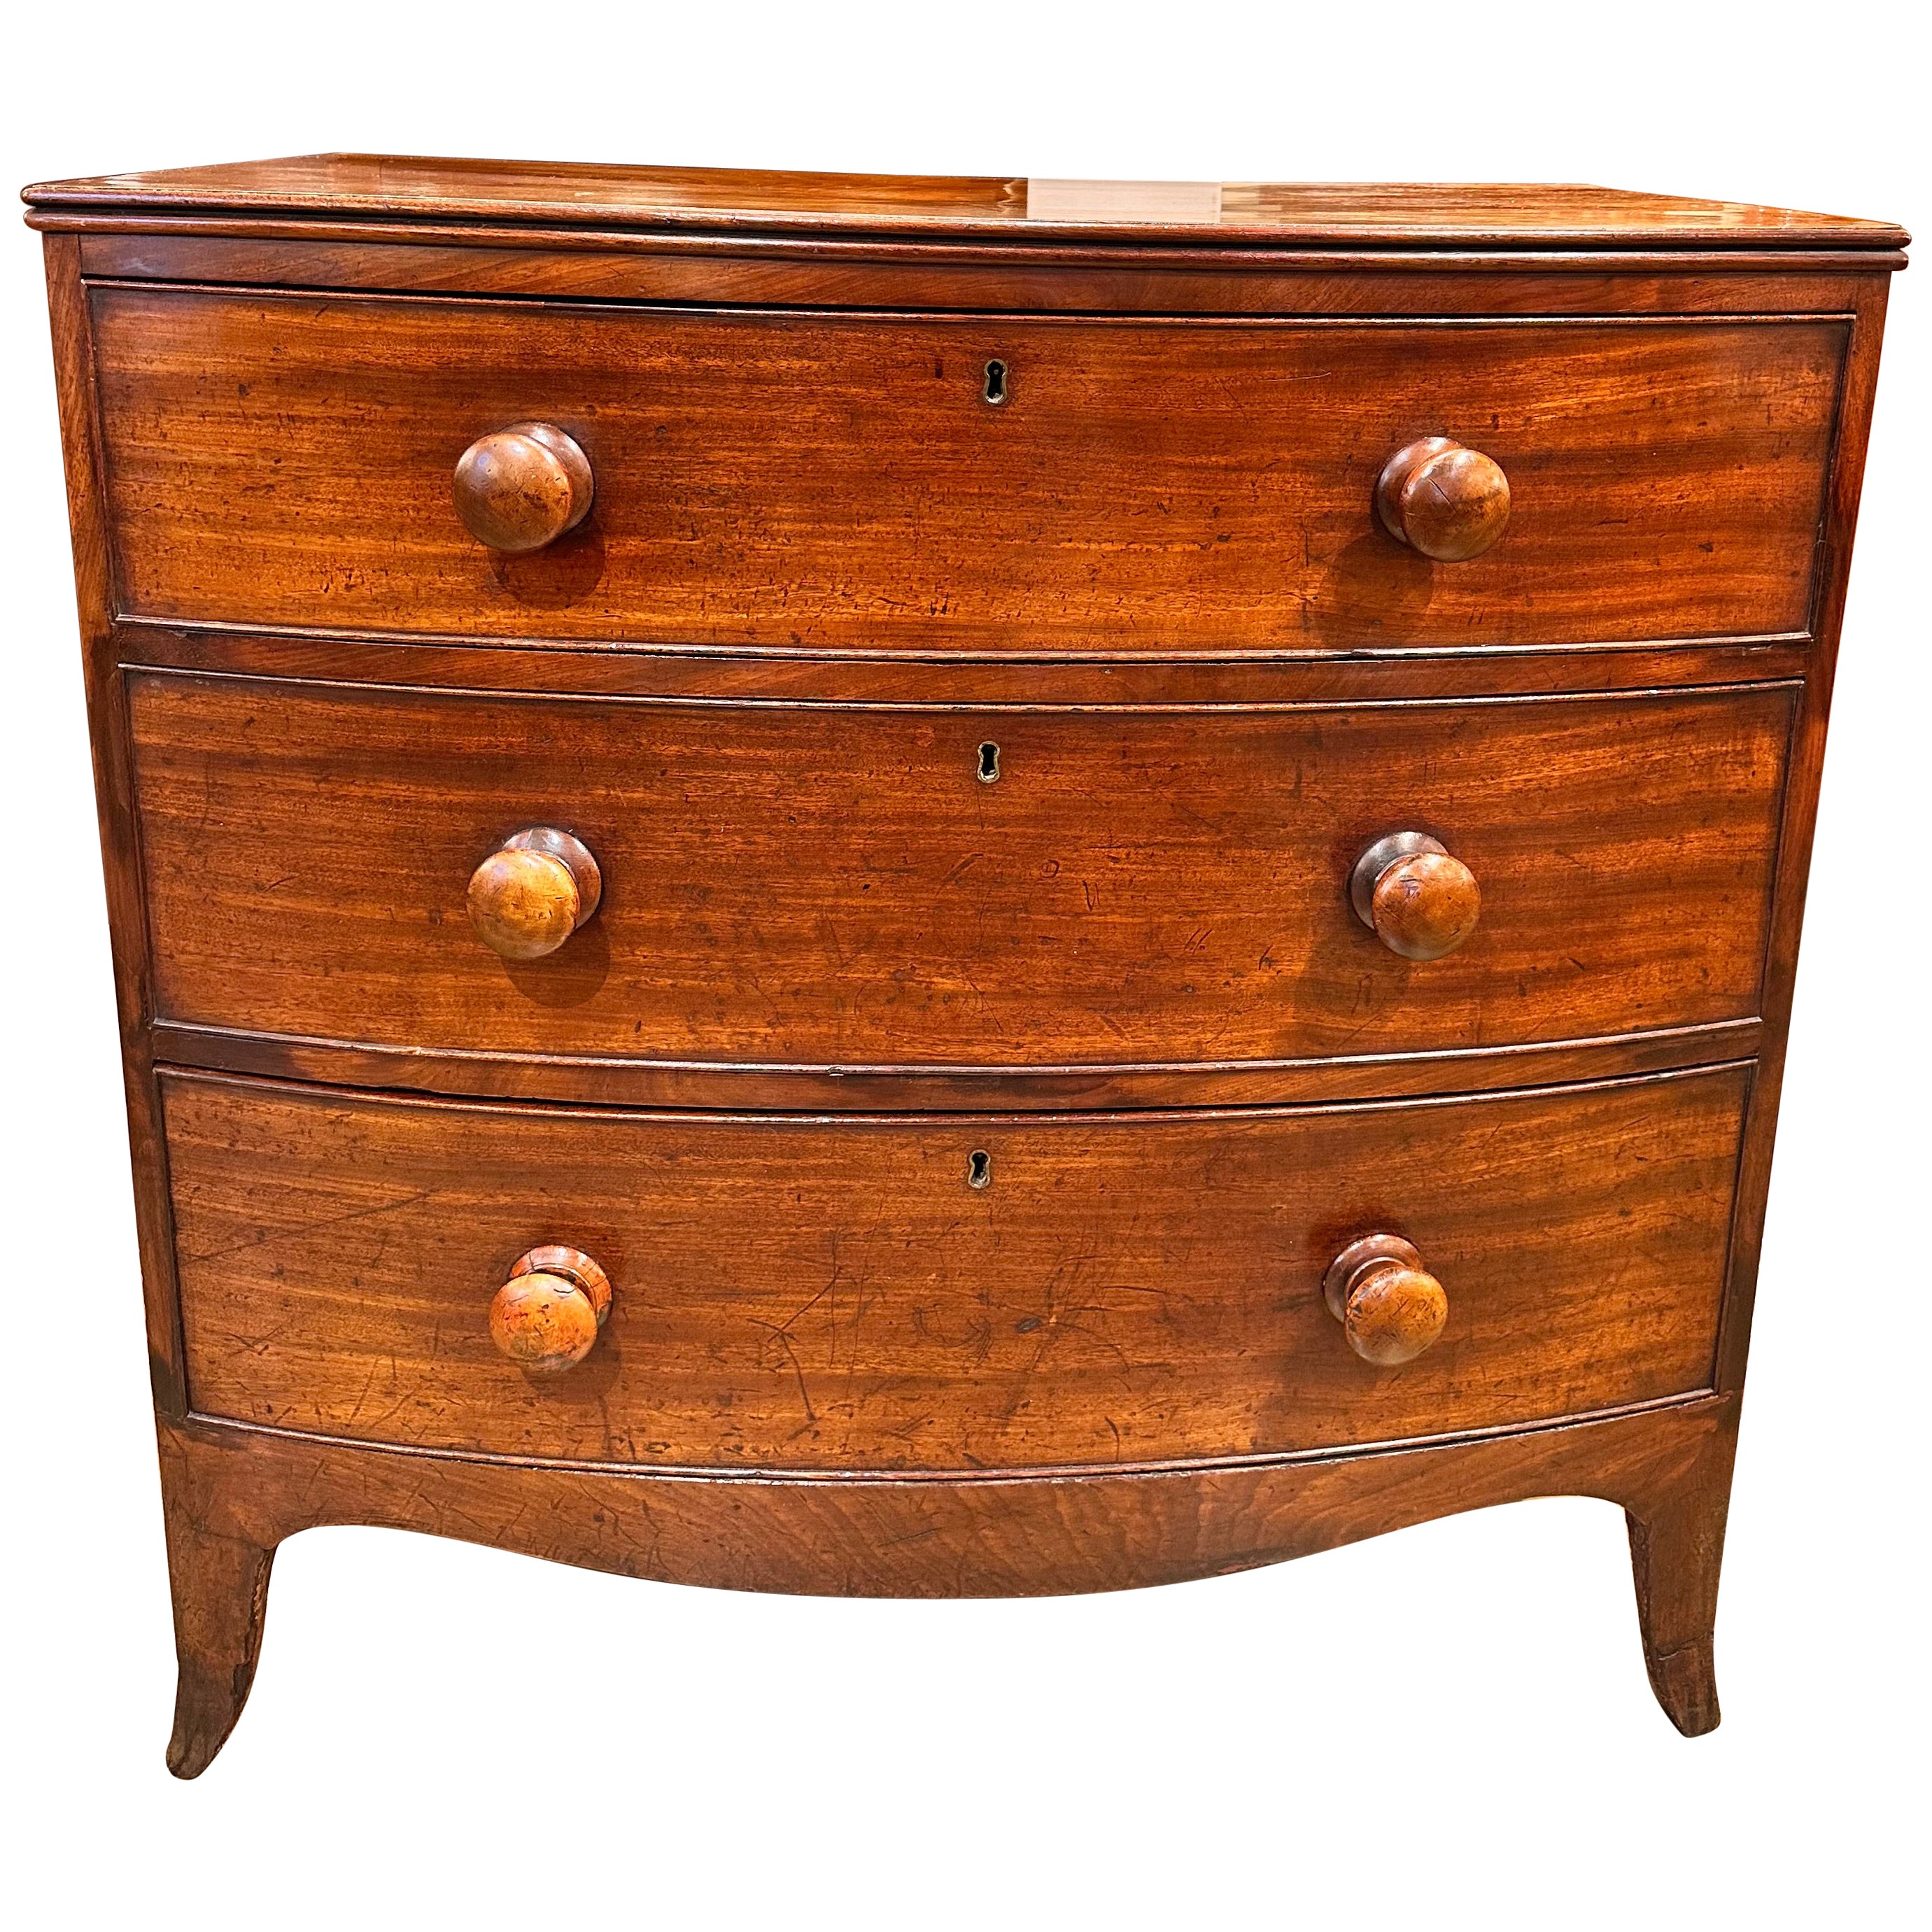 19th Century English Bowfront Chest of Drawers